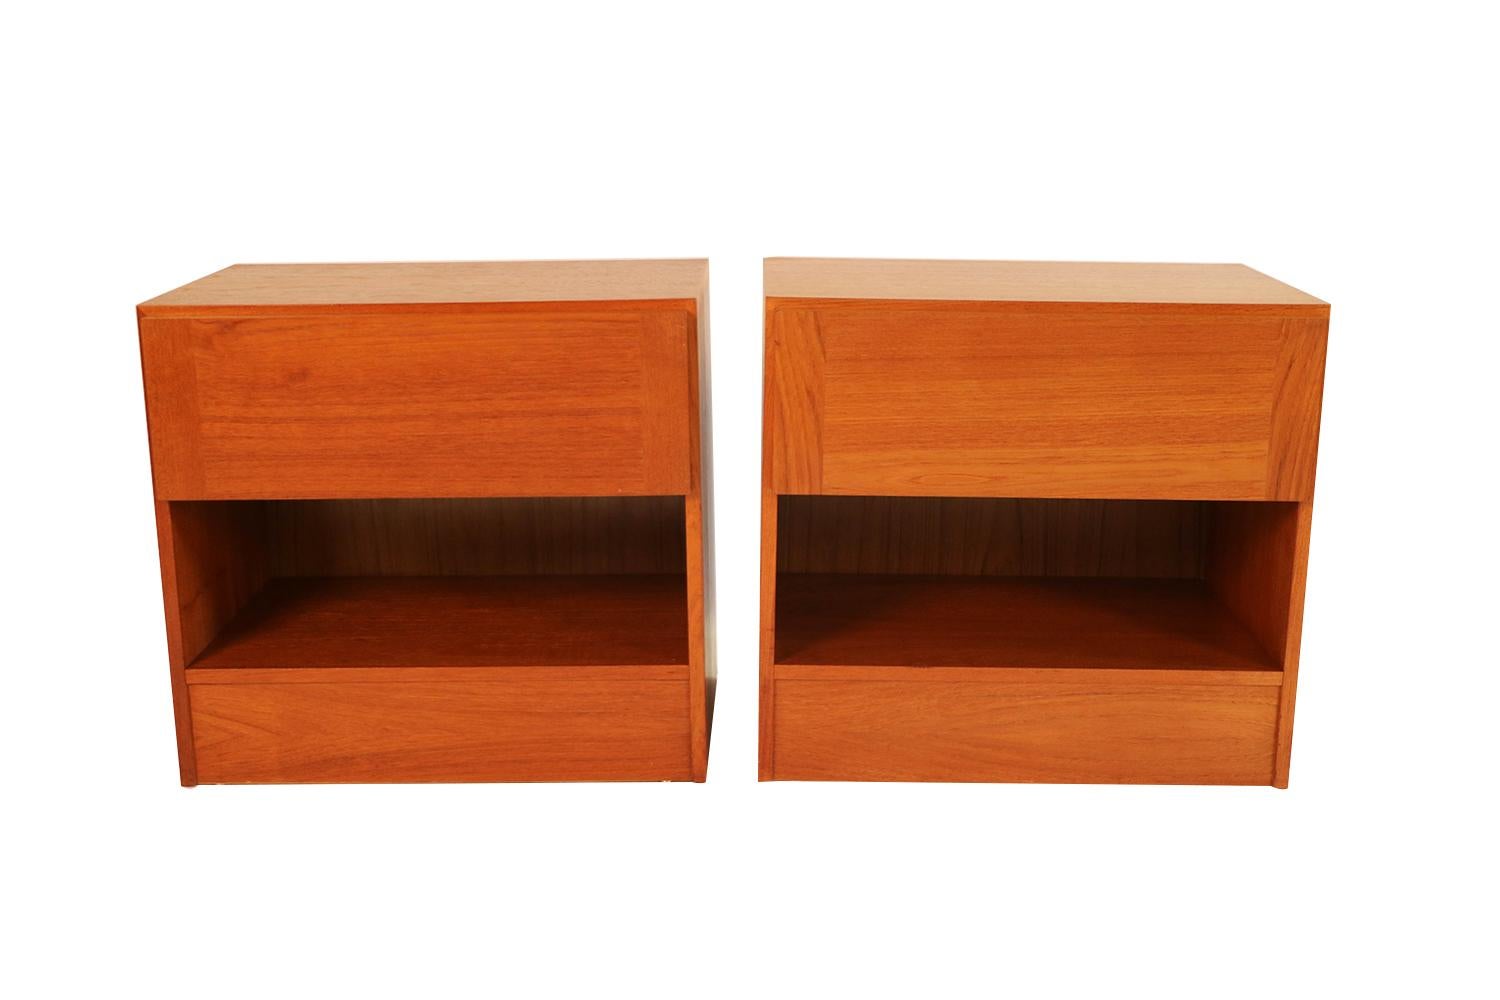 These Scandinavian Modernist, teak Danish tables were produced in Denmark by Vinde Møbelfabrik and designed by Arne Wahl Iversen, circa 1970s, elegant design with clean straight lines that make them sleek, minimalist pieces with functionality,